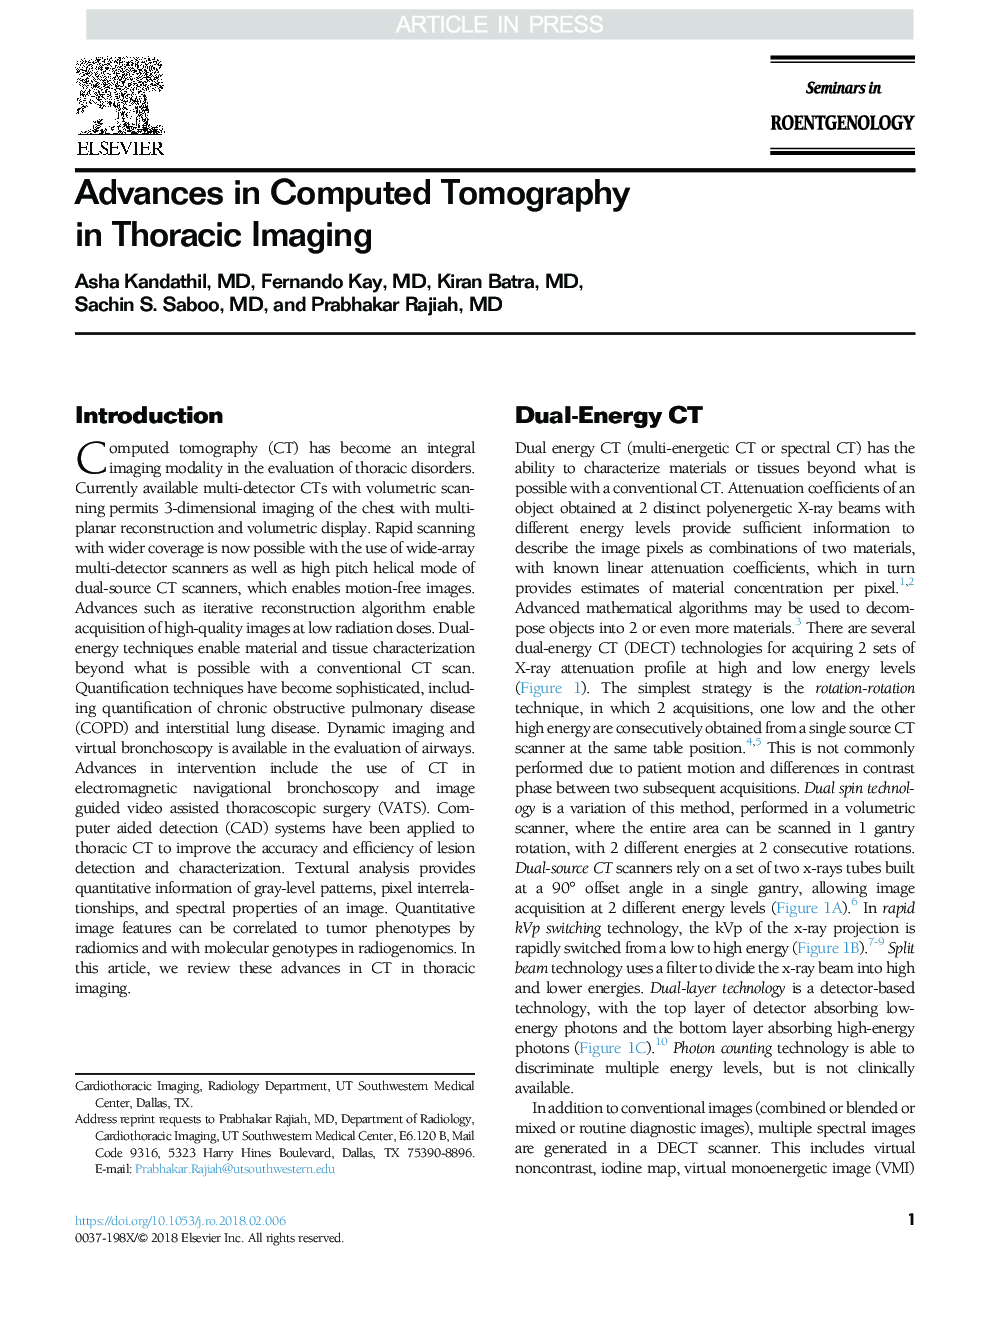 Advances in Computed Tomography in Thoracic Imaging